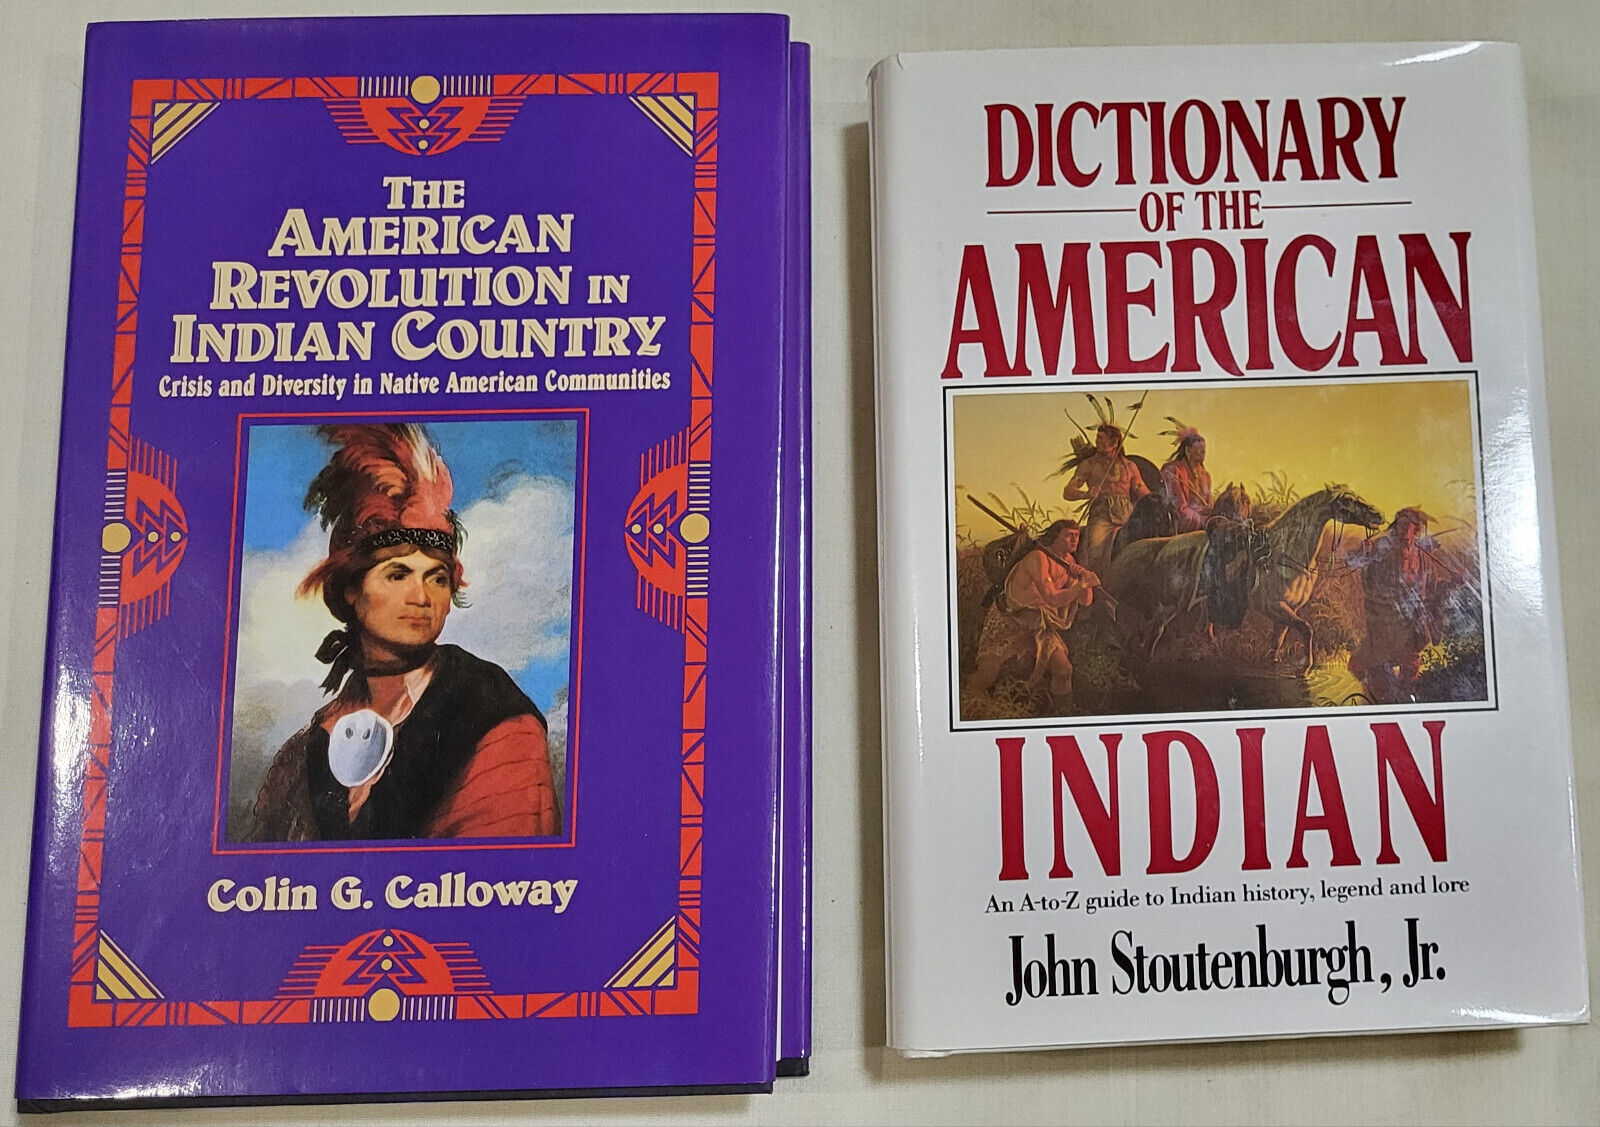 Lot of 2 * Dictionary of American Indian * American Revolution in Indian Country